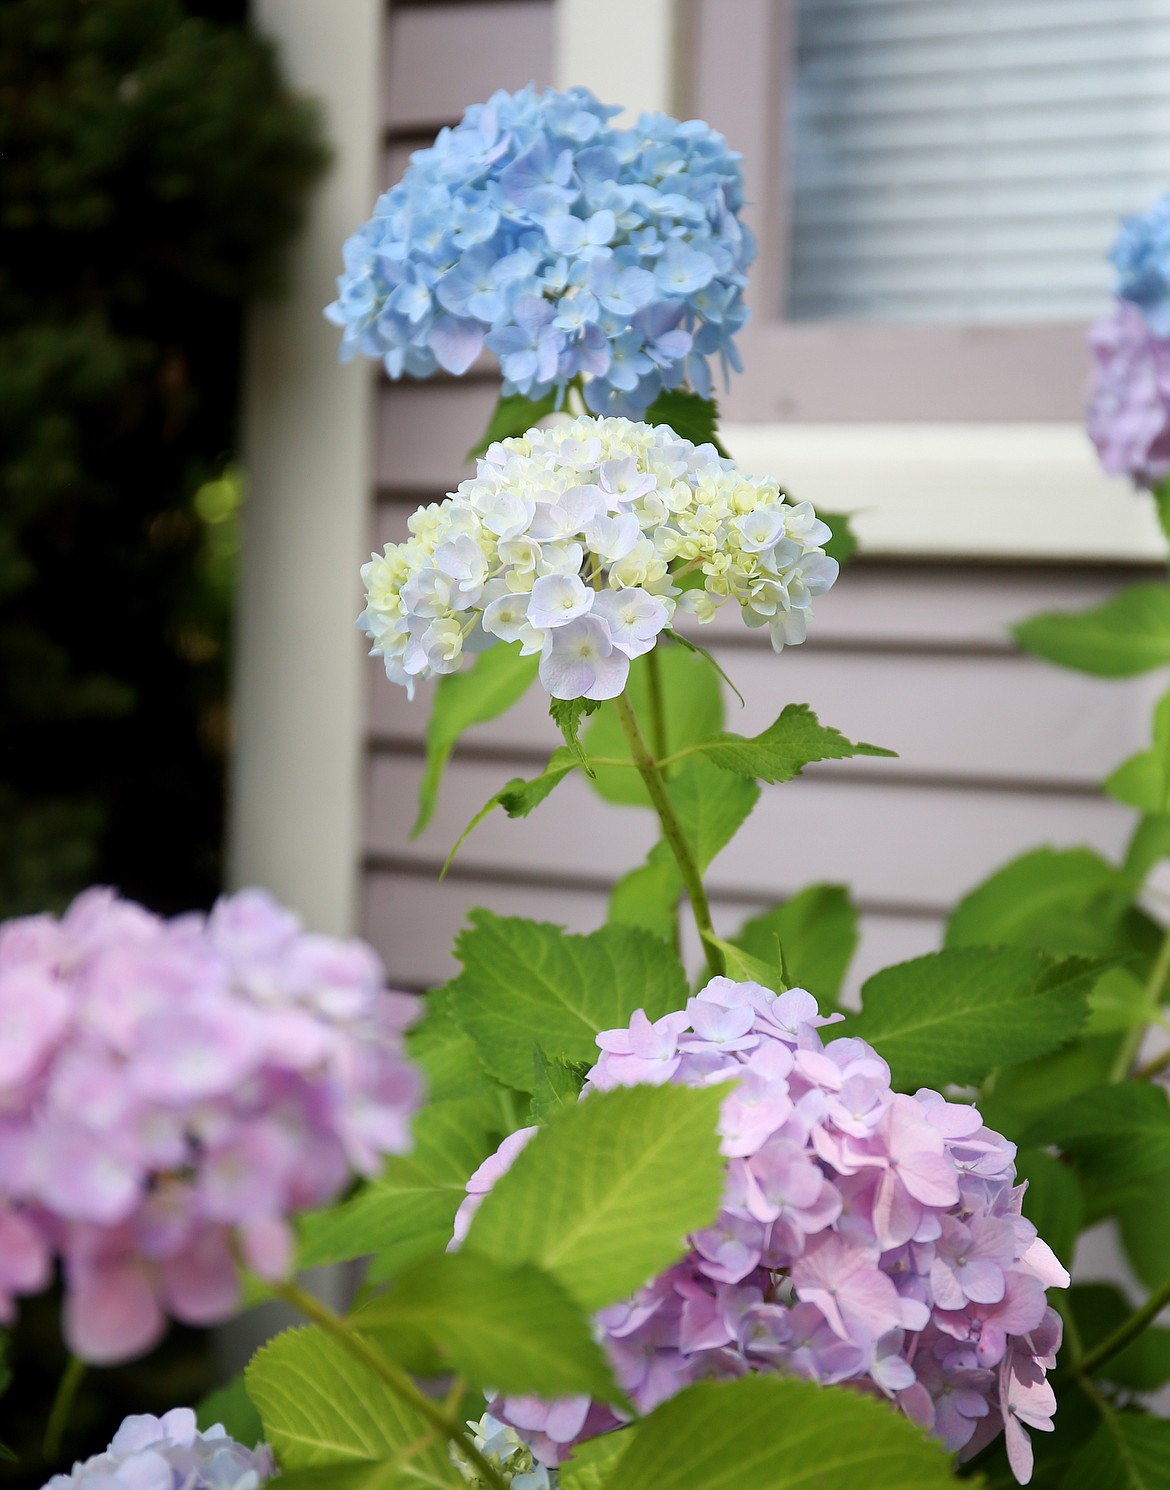 Since purchasing the home in 2005, Susan and Will Beglingers have surrounded their house with visually and olfactory-pleasing shrubs, berries, flowers and and plants, like this hydrangea plant. (LOREN BENOIT/Press)